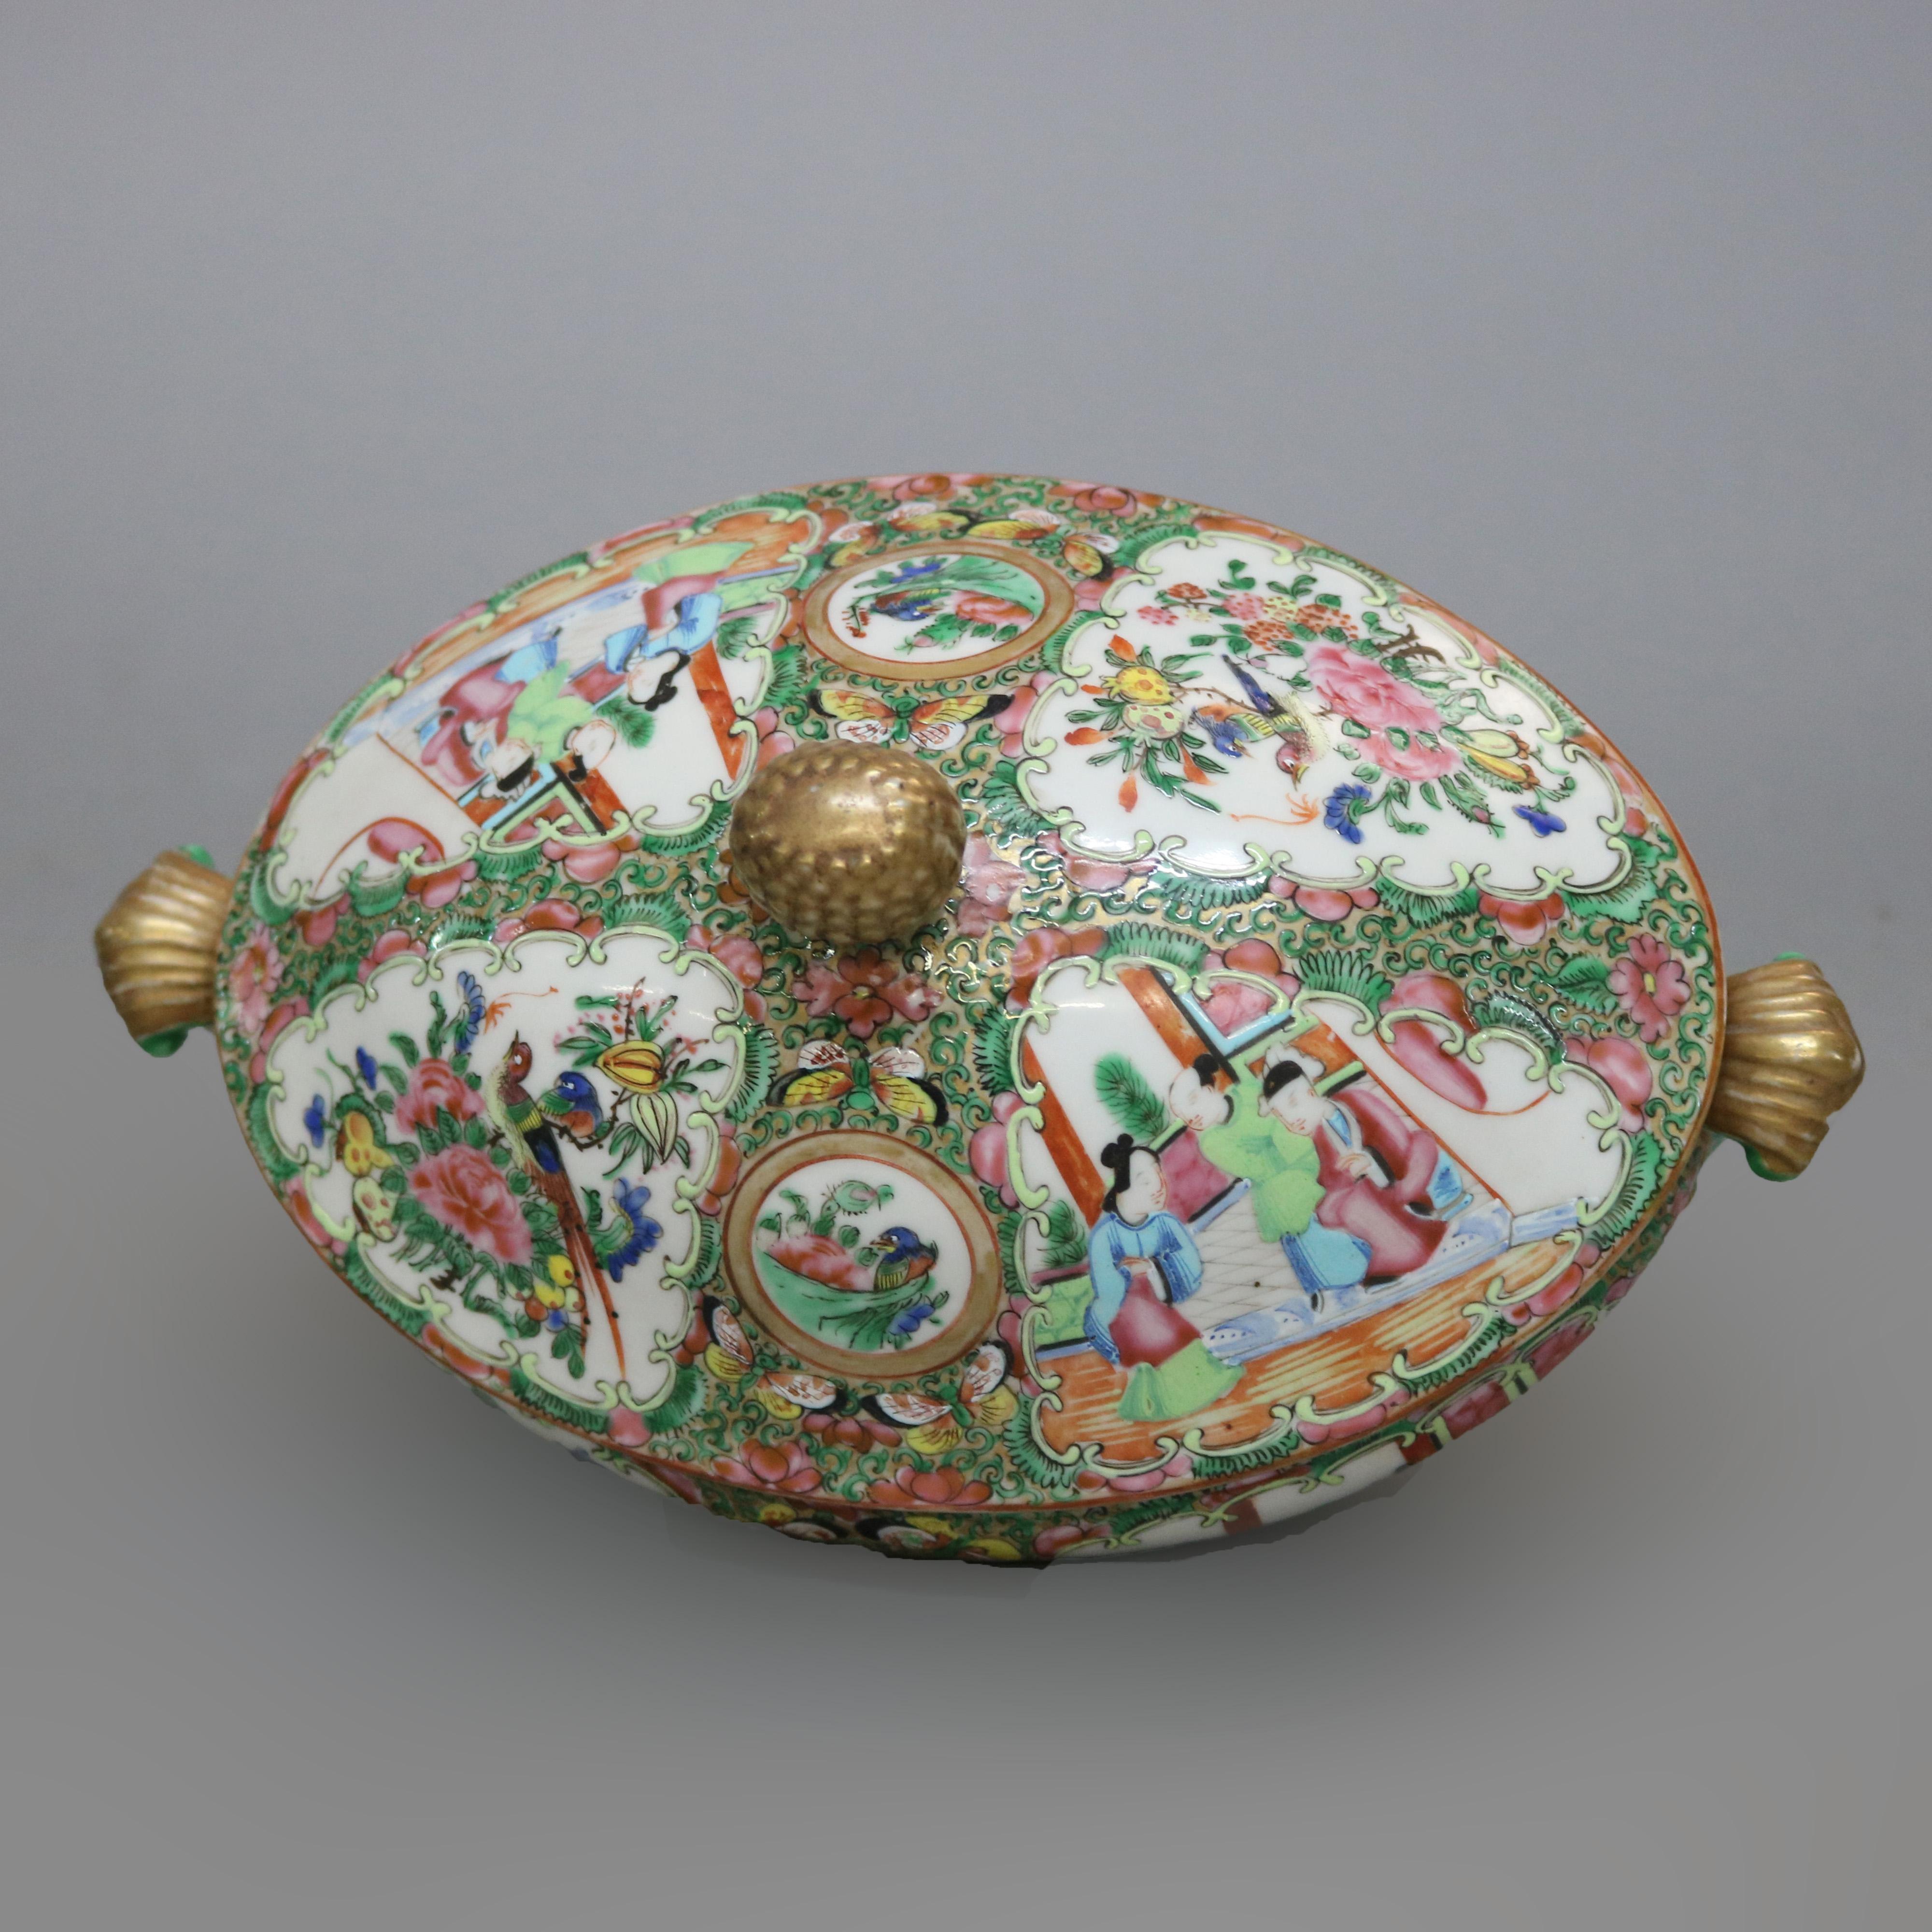 An antique Chinese Rose Medallion porcelain tureen offers gilt and beaded finial surmounting oval form floral and foliate lidded vessel having reserves (panels) with garden, bird, figure and genre scenes, flanking scrolled and gilt handles, raised